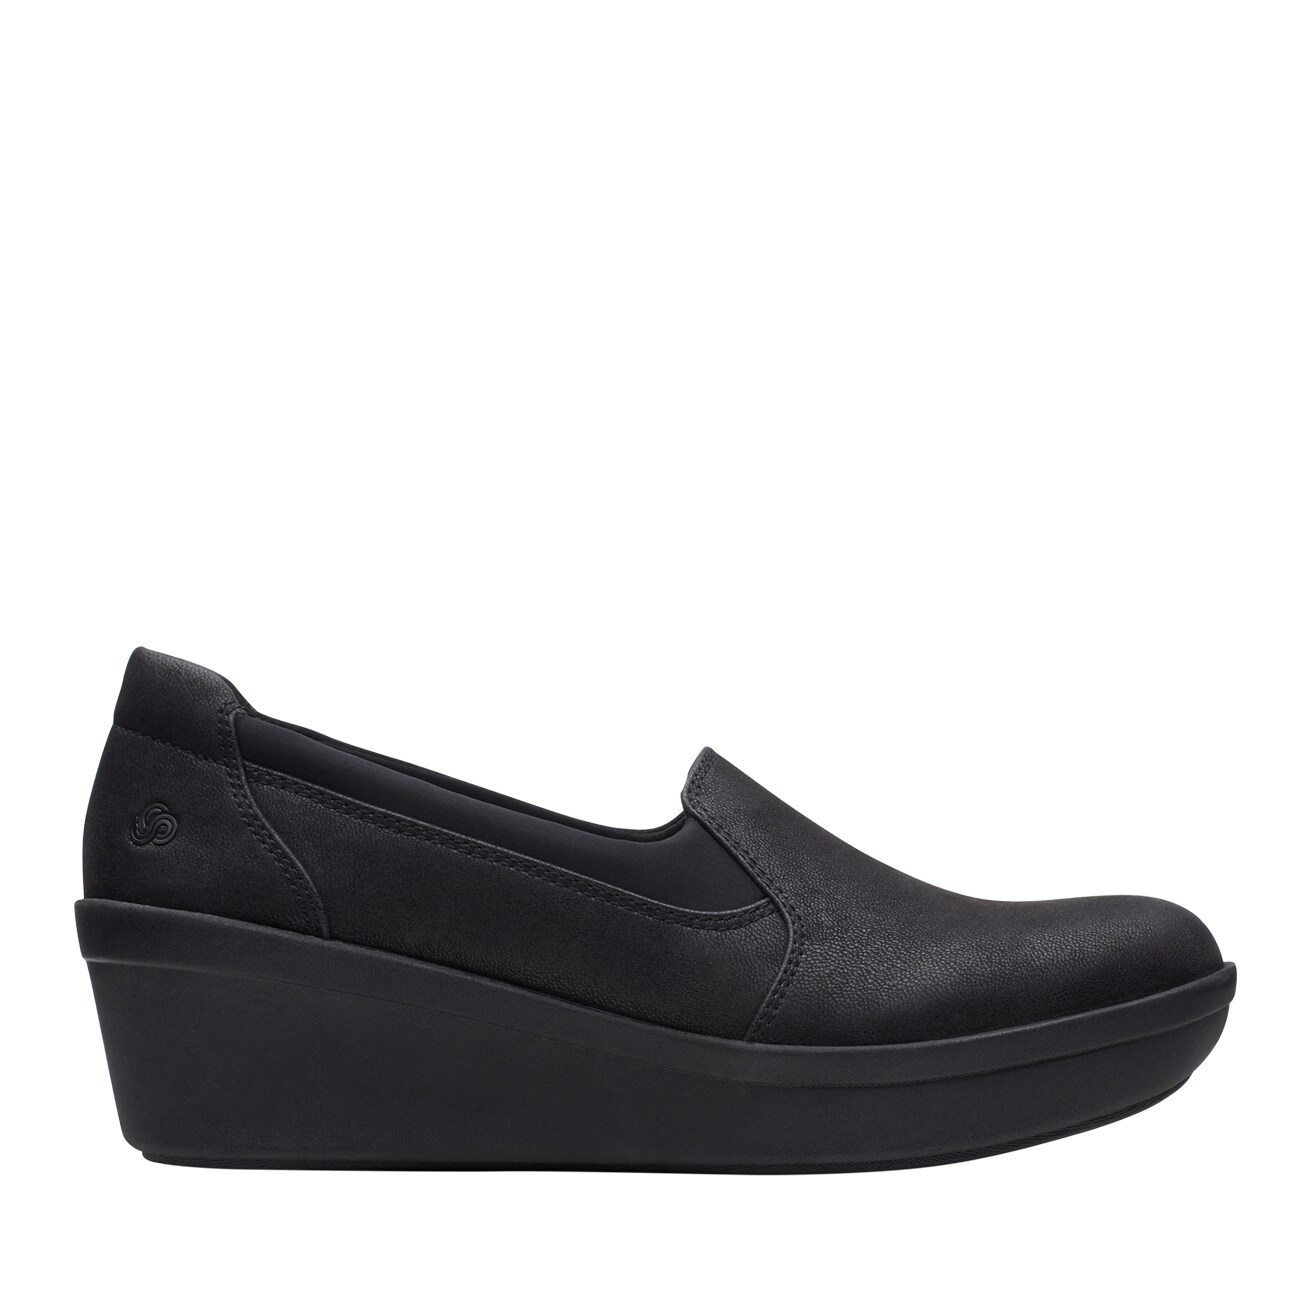 clarks shoes canada buy online